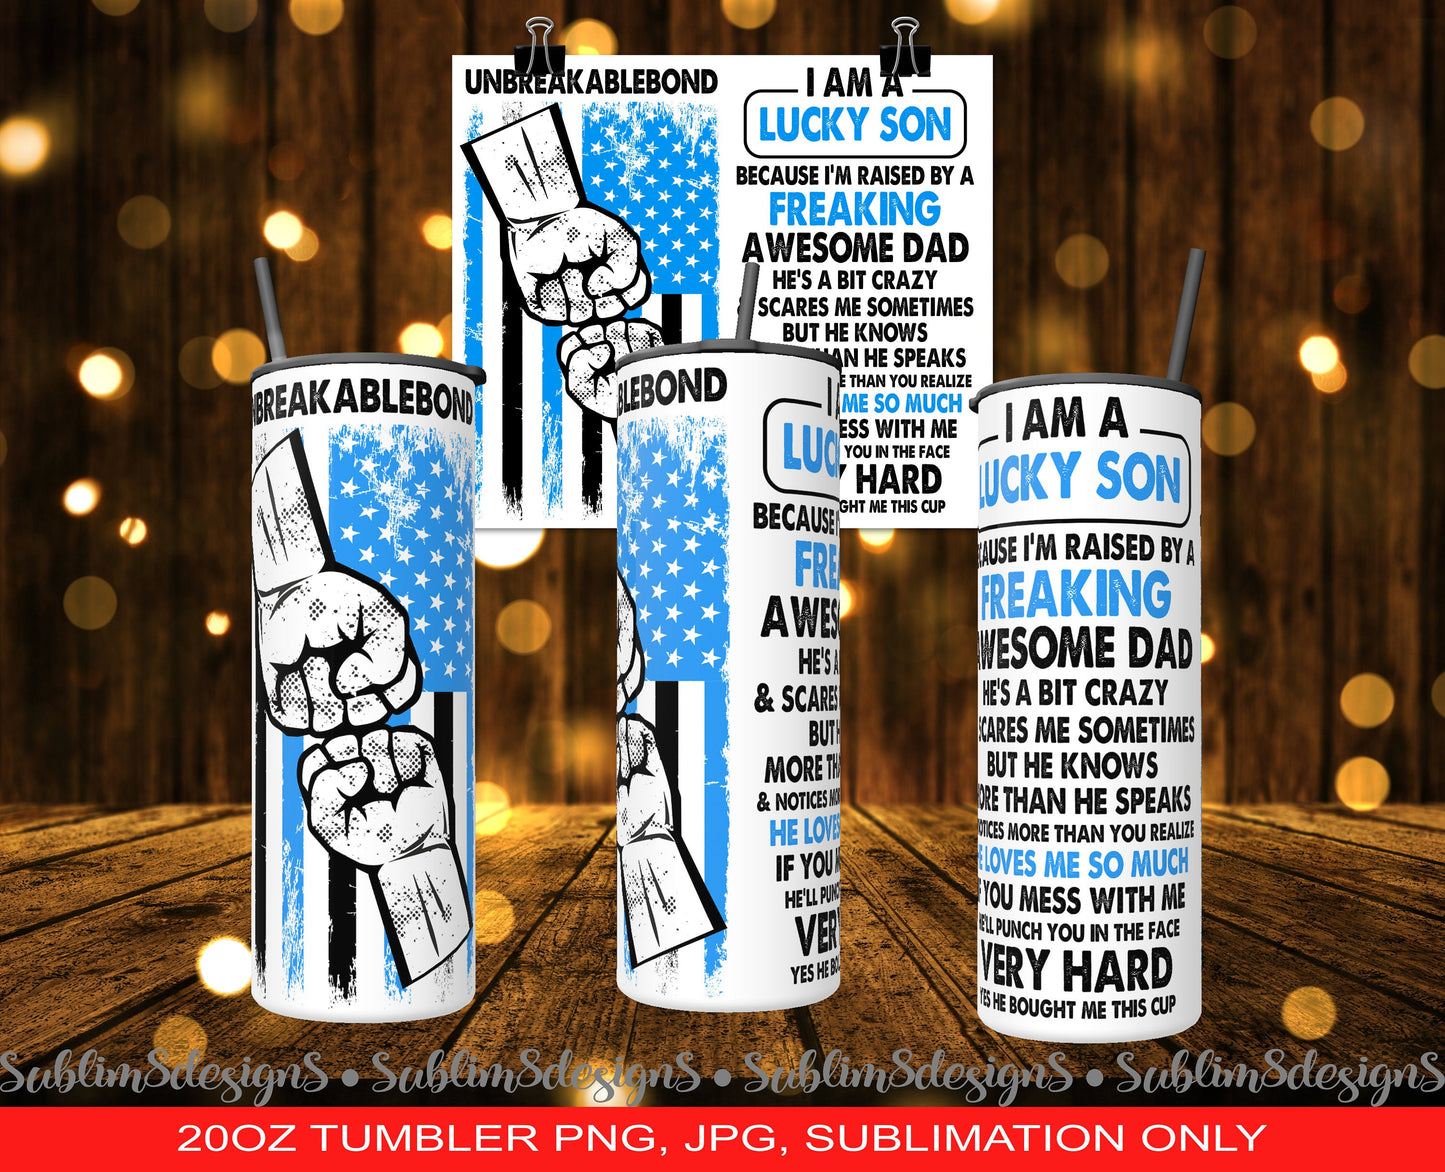 I Am A Lucky Son - Father's Day Gift - Perfect for the ultimate Daddy's boy! - Blue No Background 20oz Tumbler Design PNG and JPG ONLY